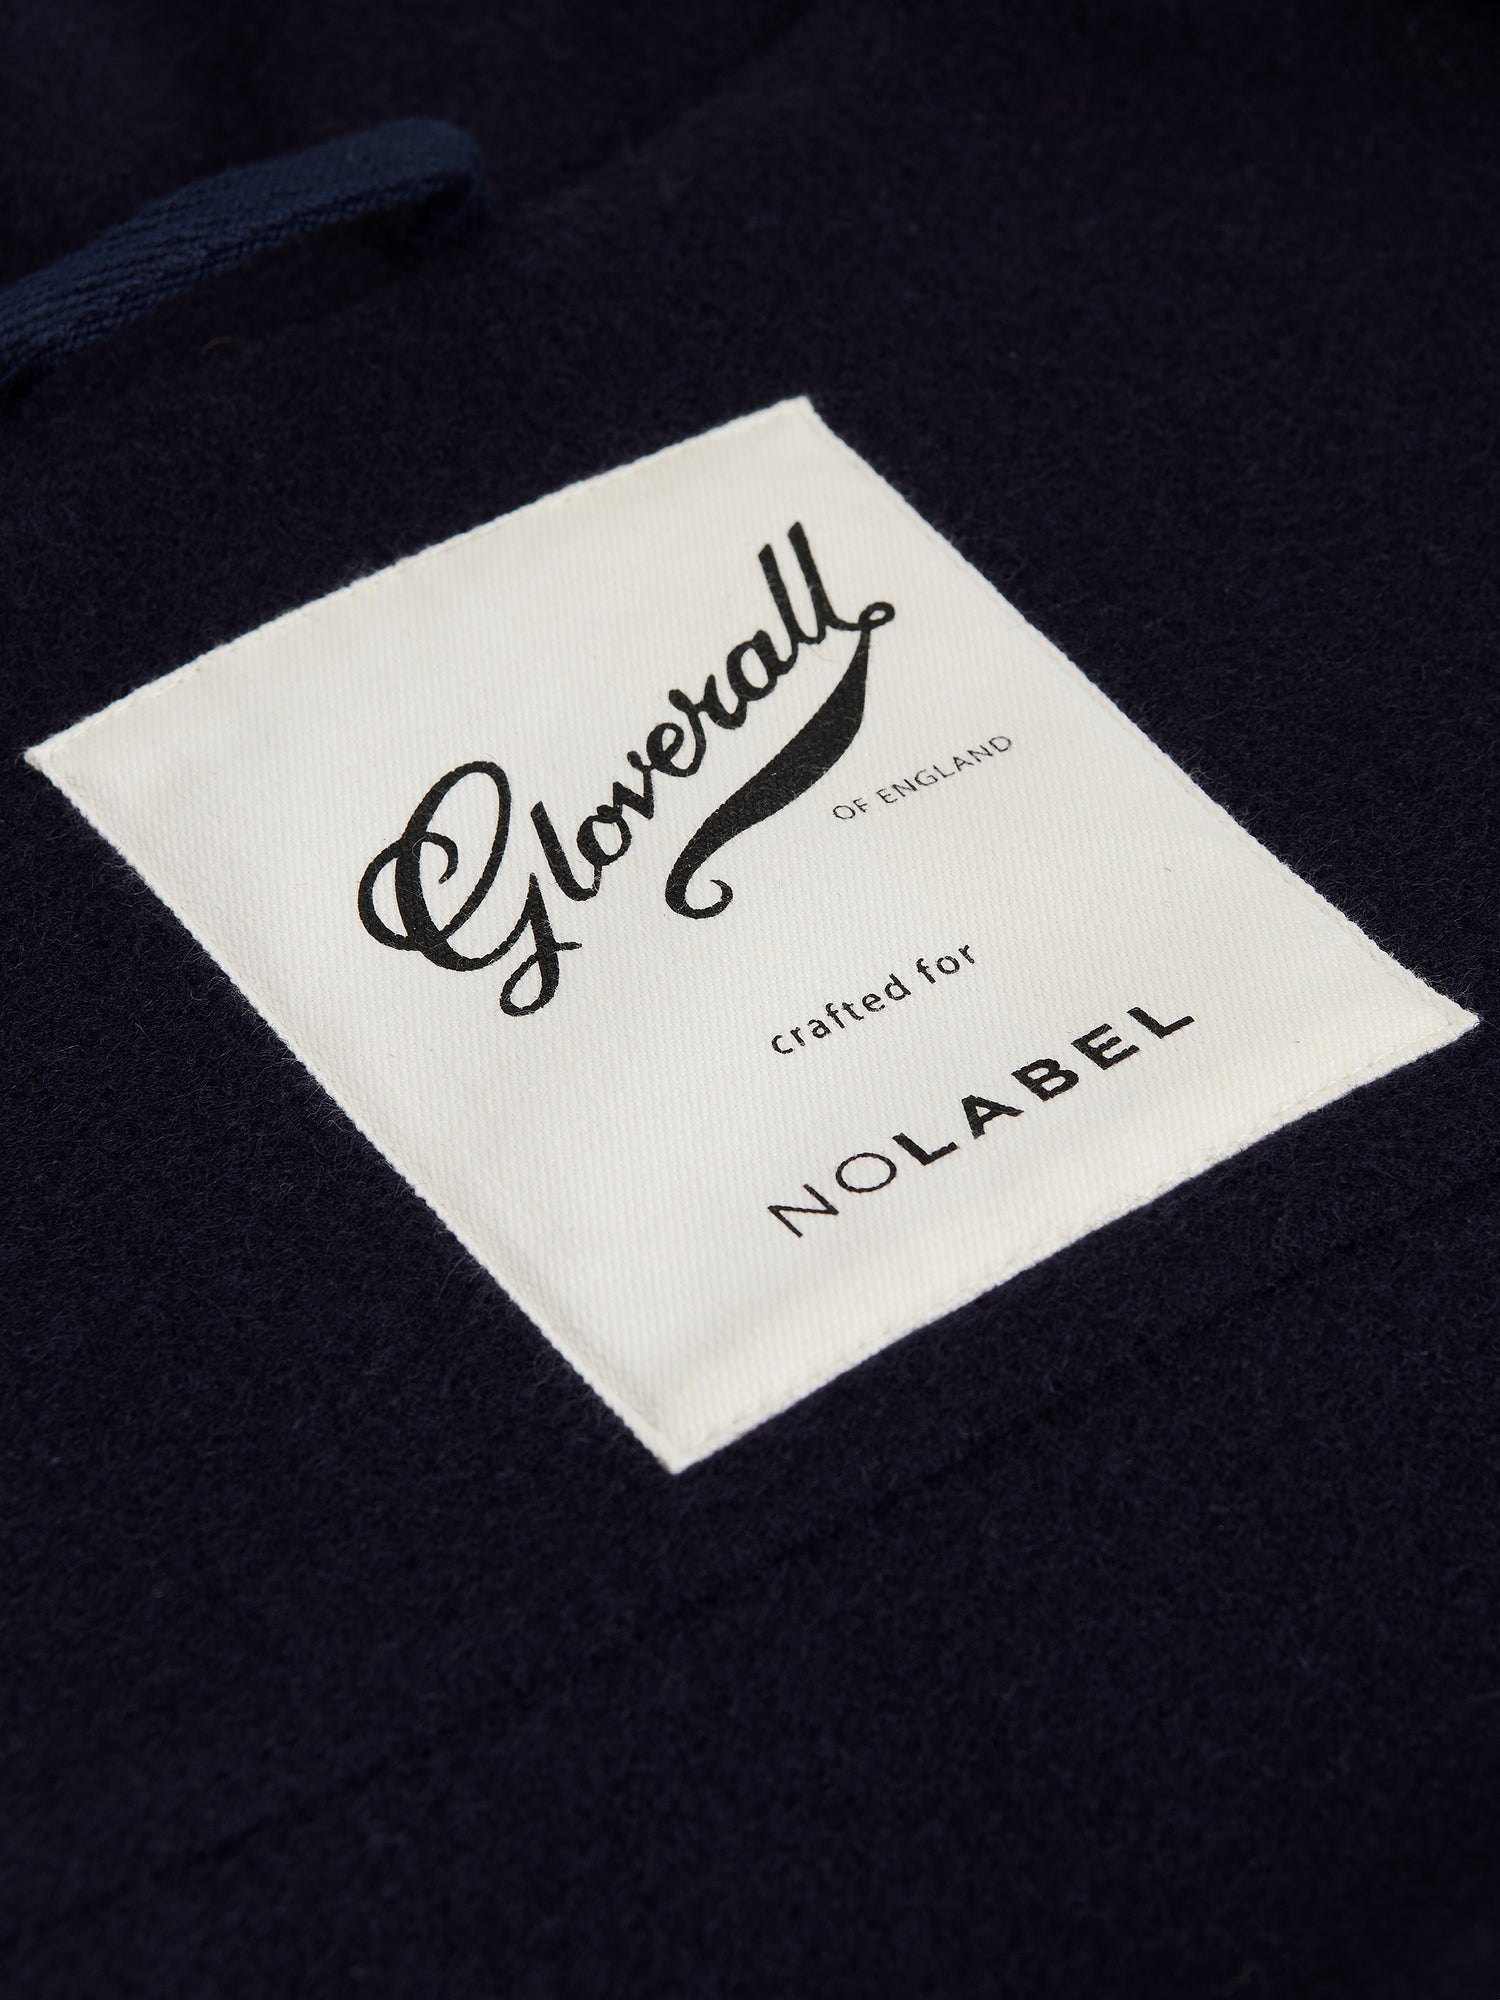 Gloverall x No Label Monty Mantel Wolle OW00042-NVY